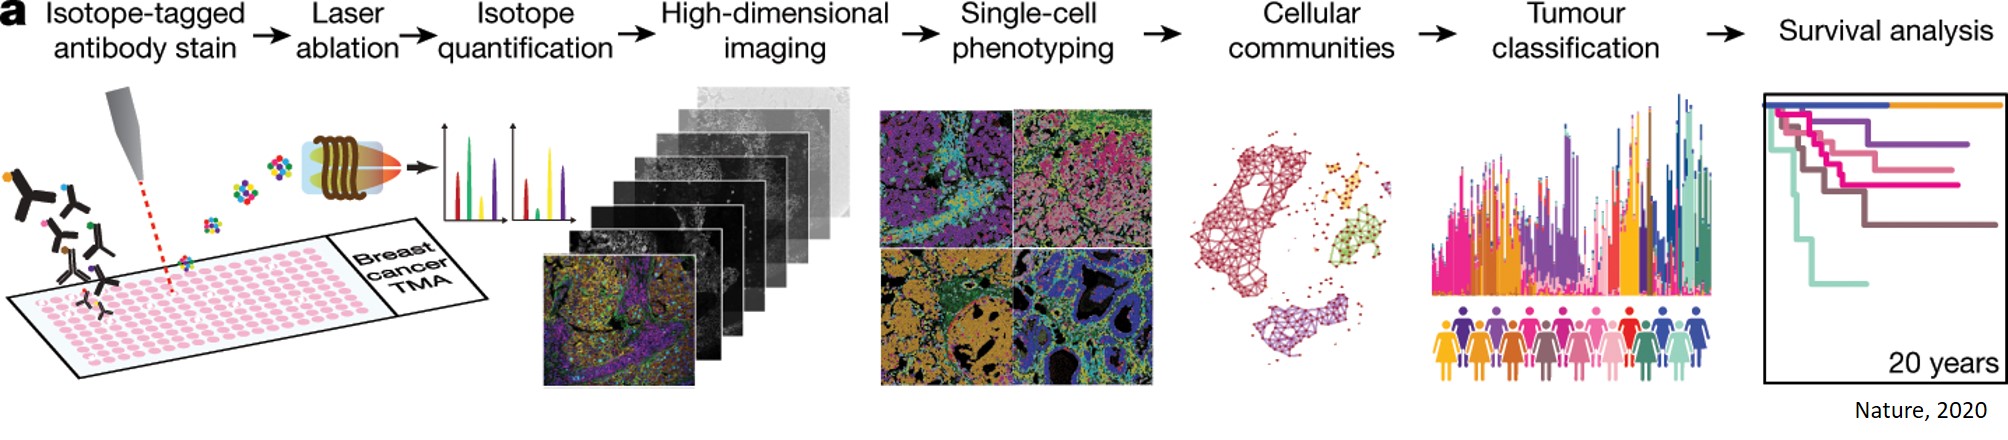 The single-cell pathology landscape of breast cancer 